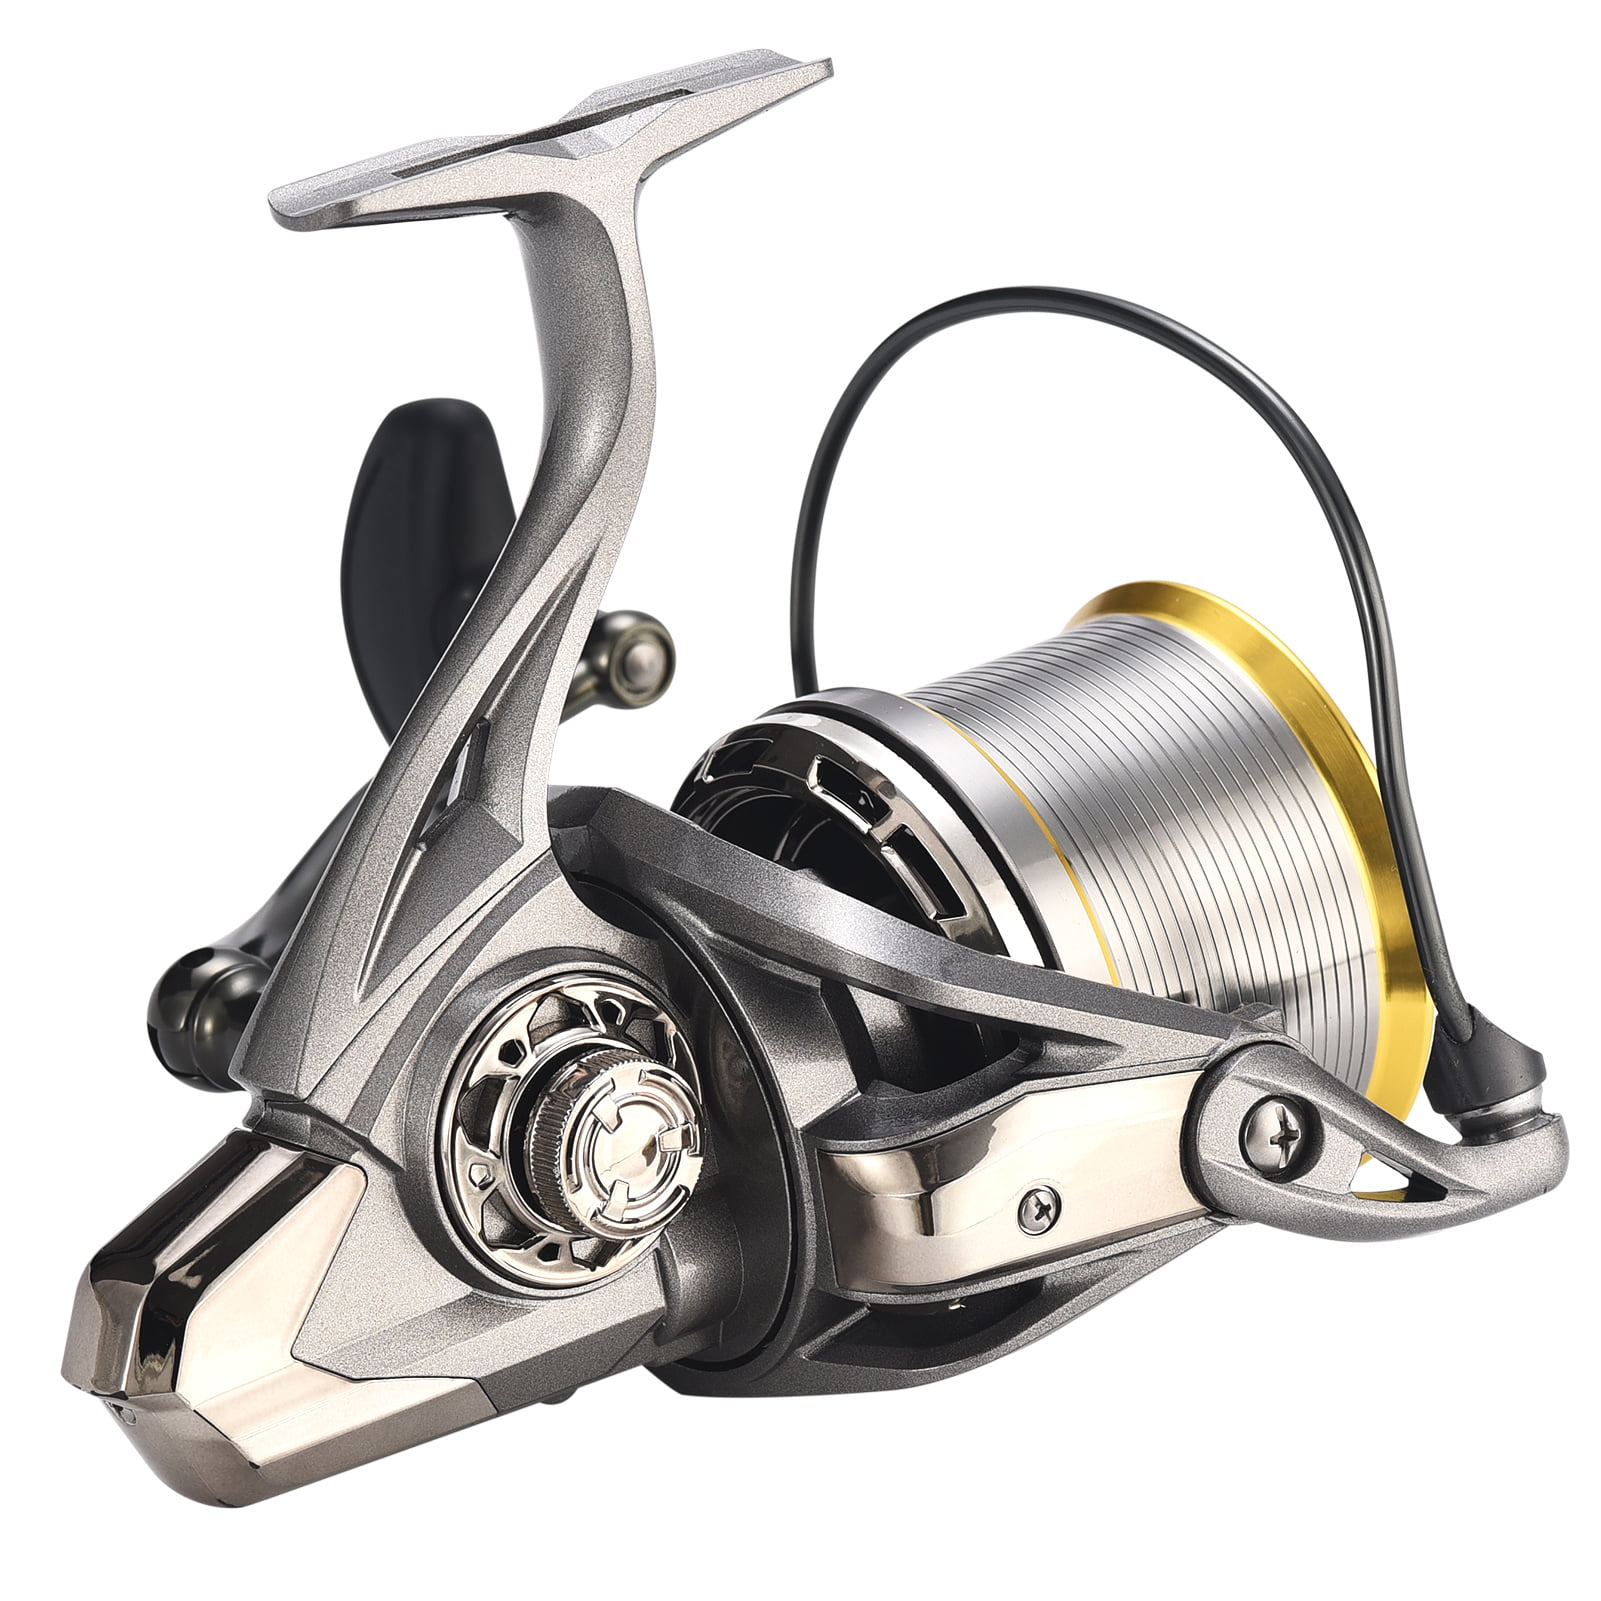 17+1BB Spinning Reel 4.8:1 with Interchangeable Left and Right Handle 